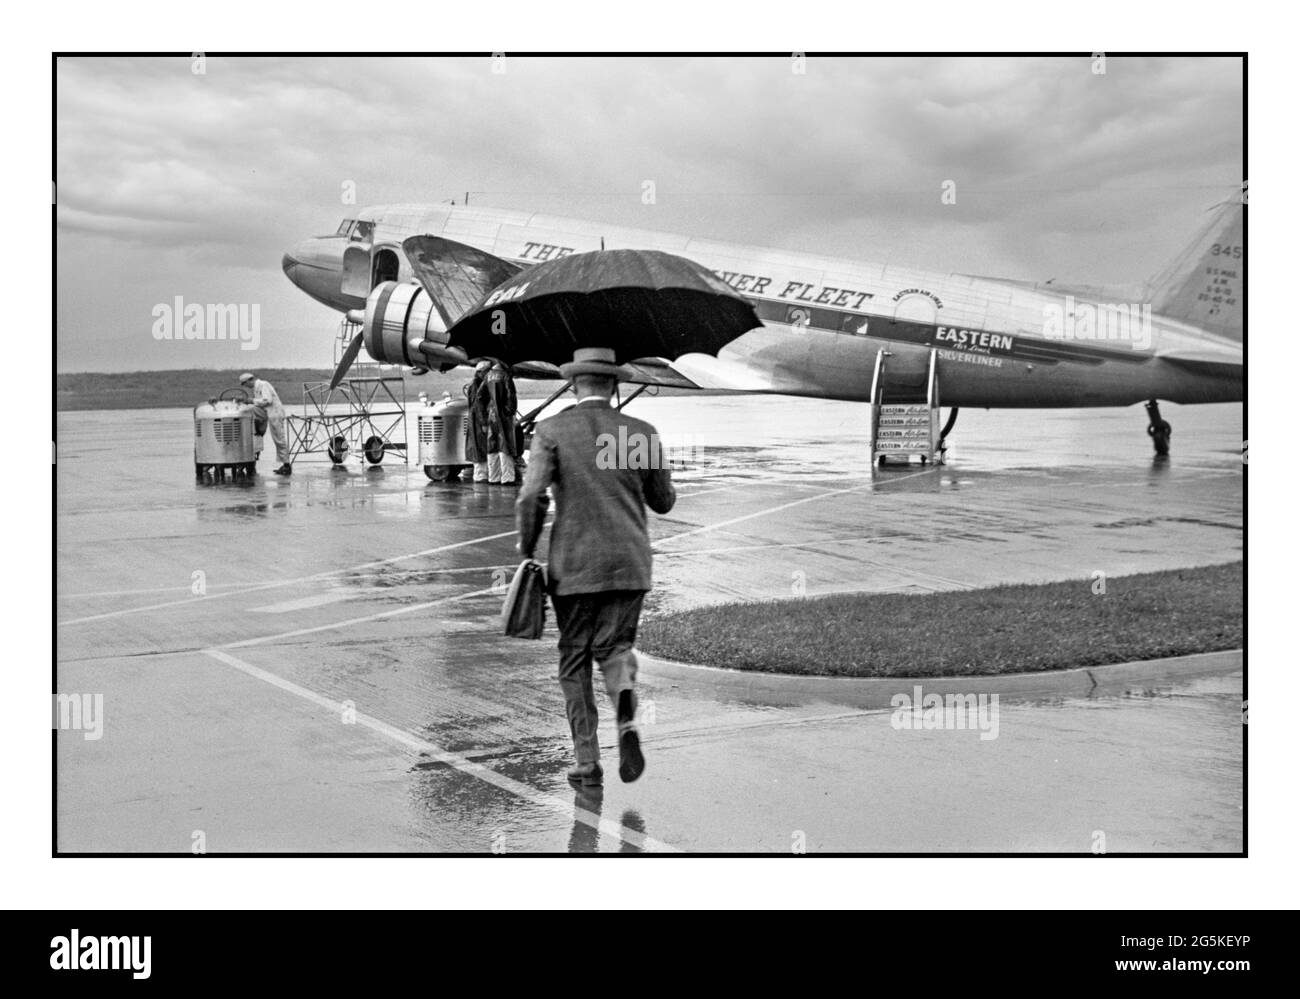 Vintage airline flying business travel 1940's WW2 Golden age of flying  Passenger businessman male man carrying umbrella boarding a DC3 twin propeller Eastern Airline Silver Fleet plane on a rainy day at the municipal airport in Washington, D.C. Jack Delano photographer 1941 July. LOC War Administration World War II United States--District of Columbia--Washington (D.C.) America USA Stock Photo